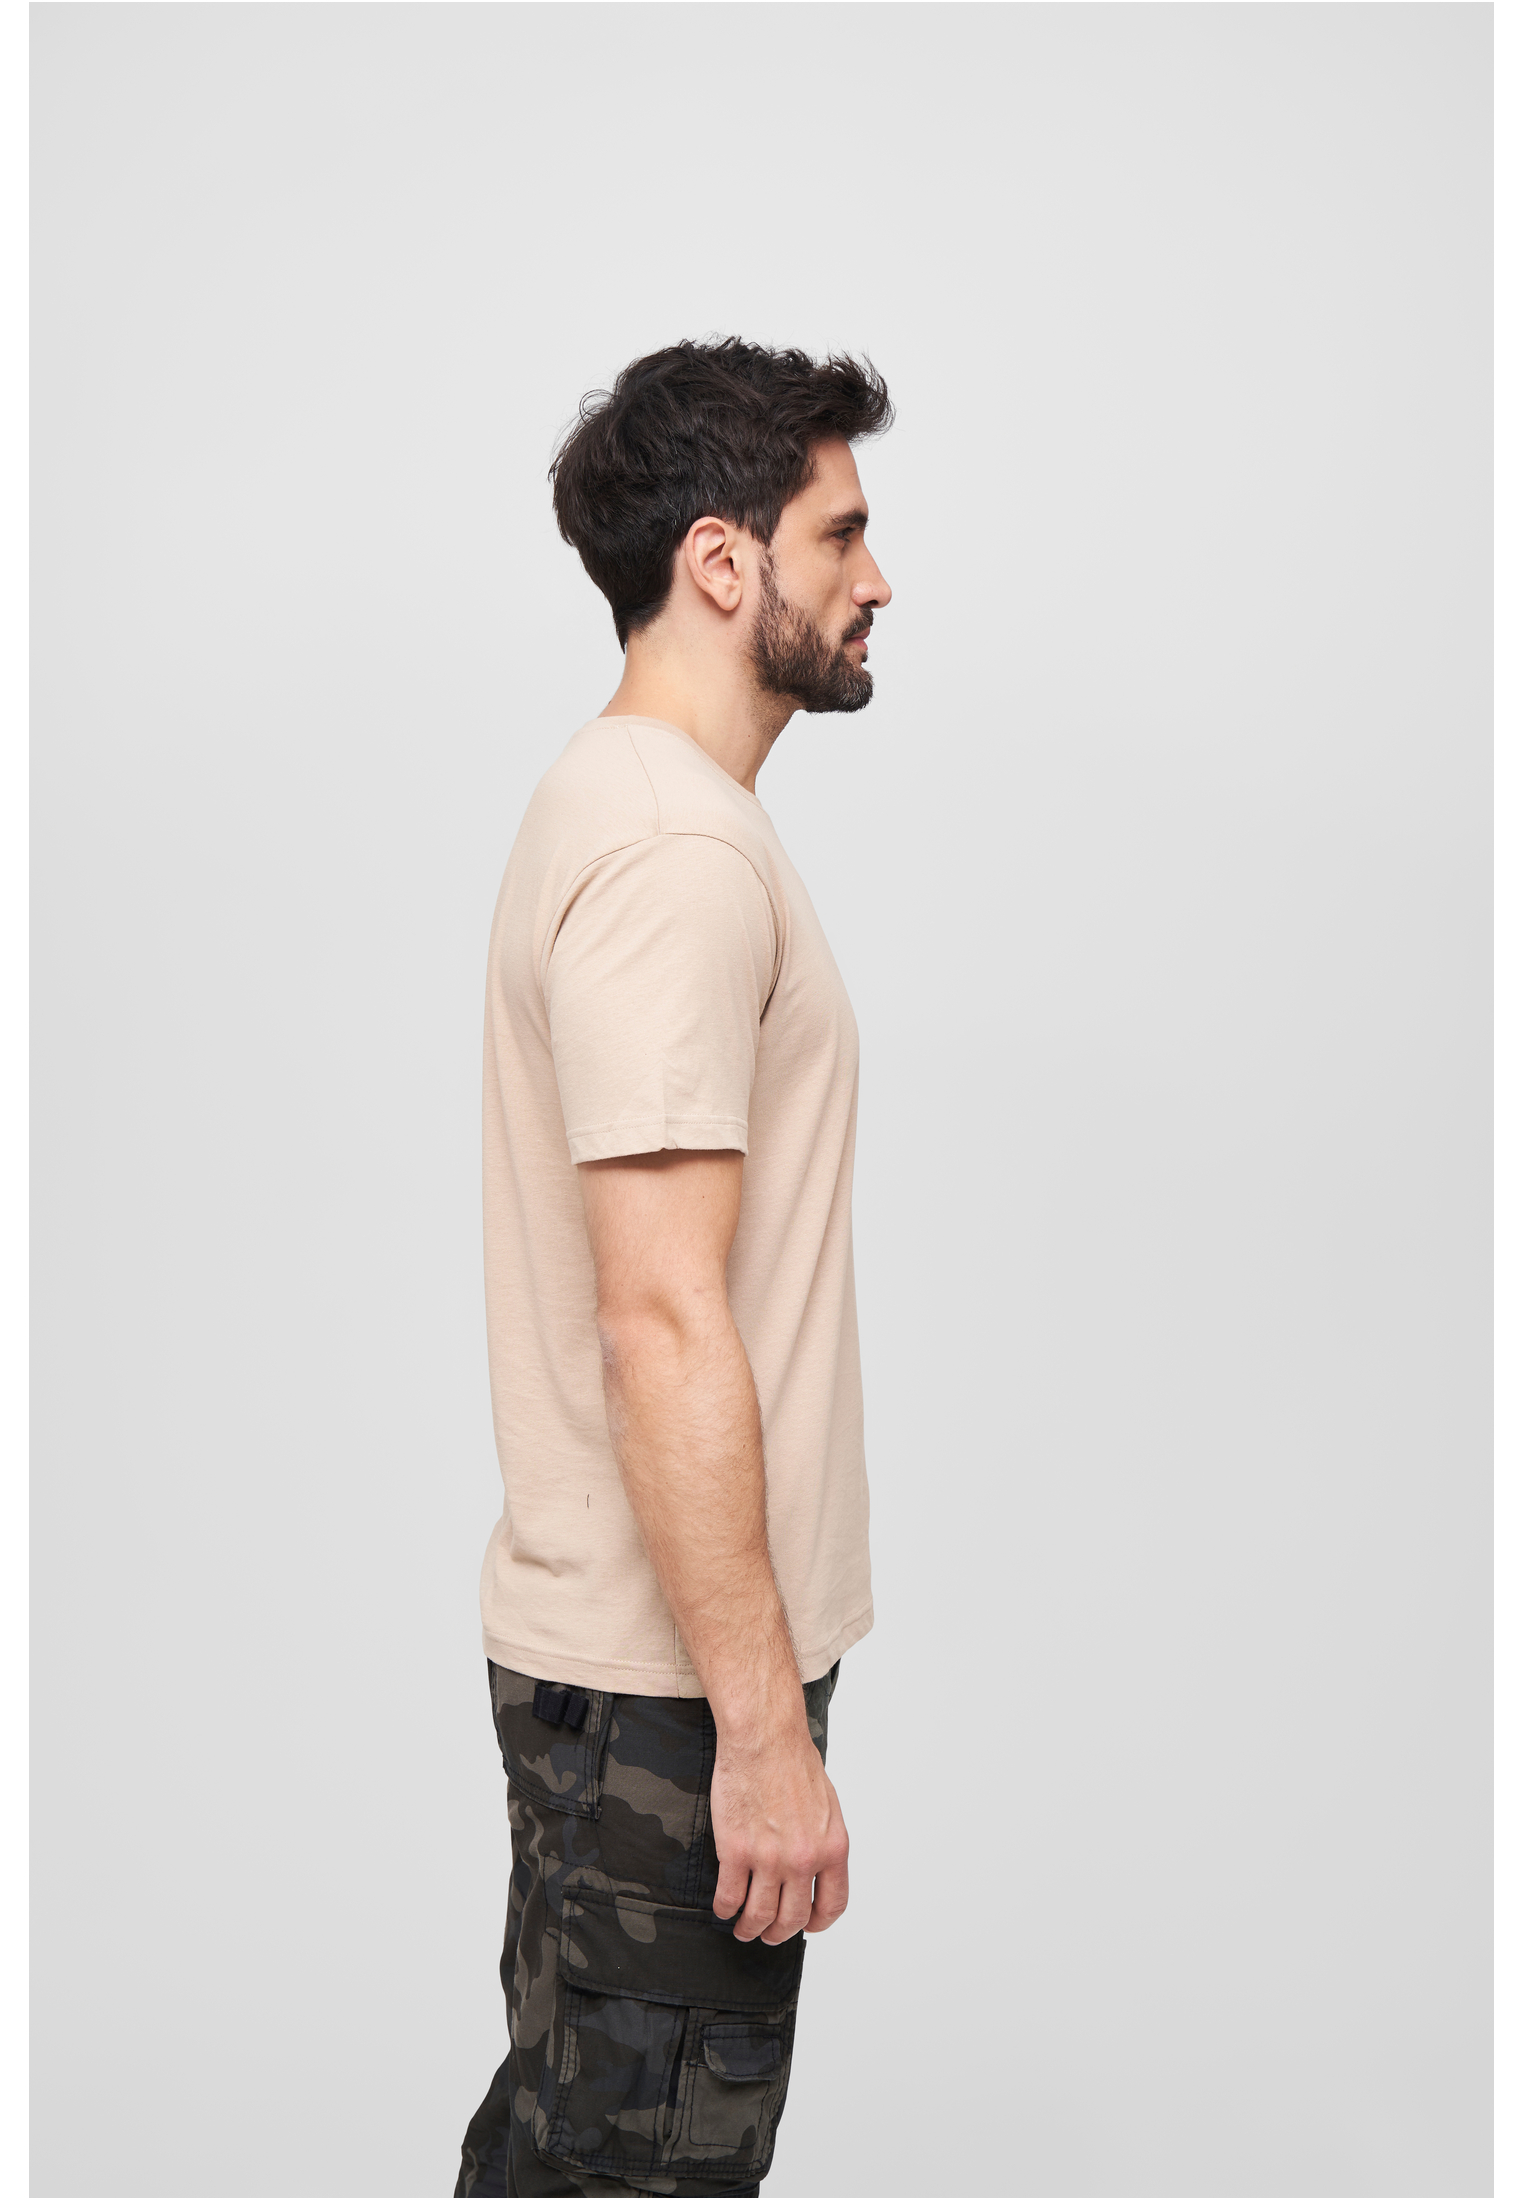 T-Shirts T-Shirt in Farbe beige